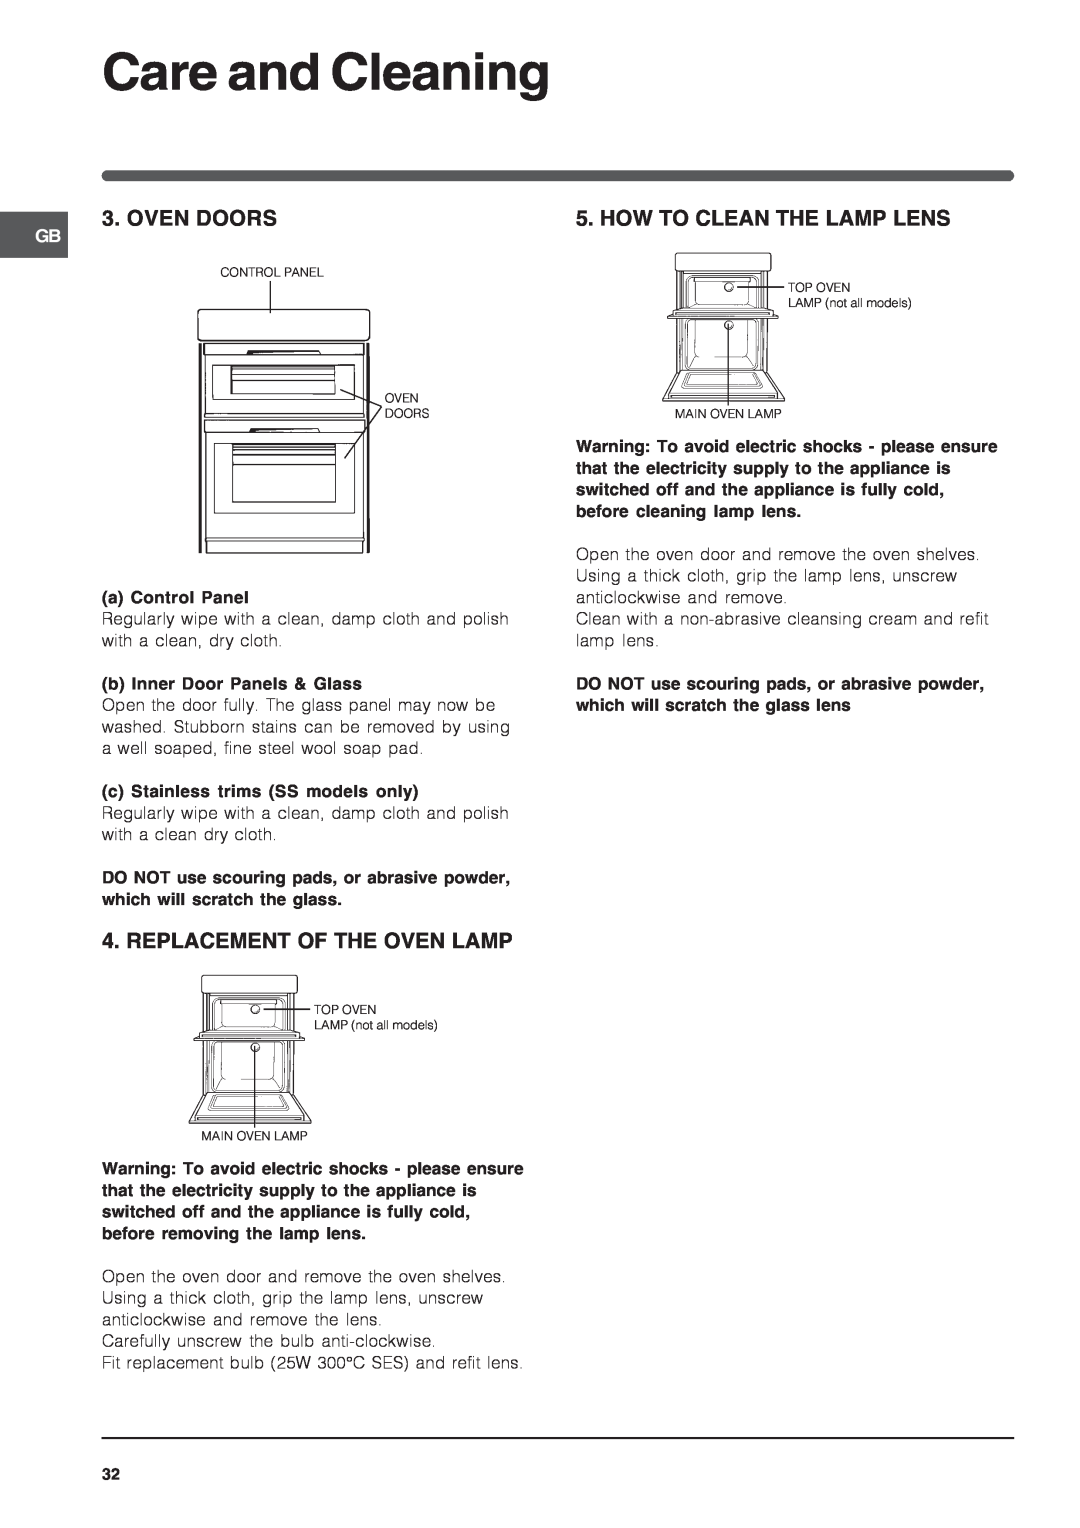 Indesit FIMD 23 IX, FIMD E23 IX Care and Cleaning, Oven Doors, Replacement Of The Oven Lamp, How To Clean The Lamp Lens 